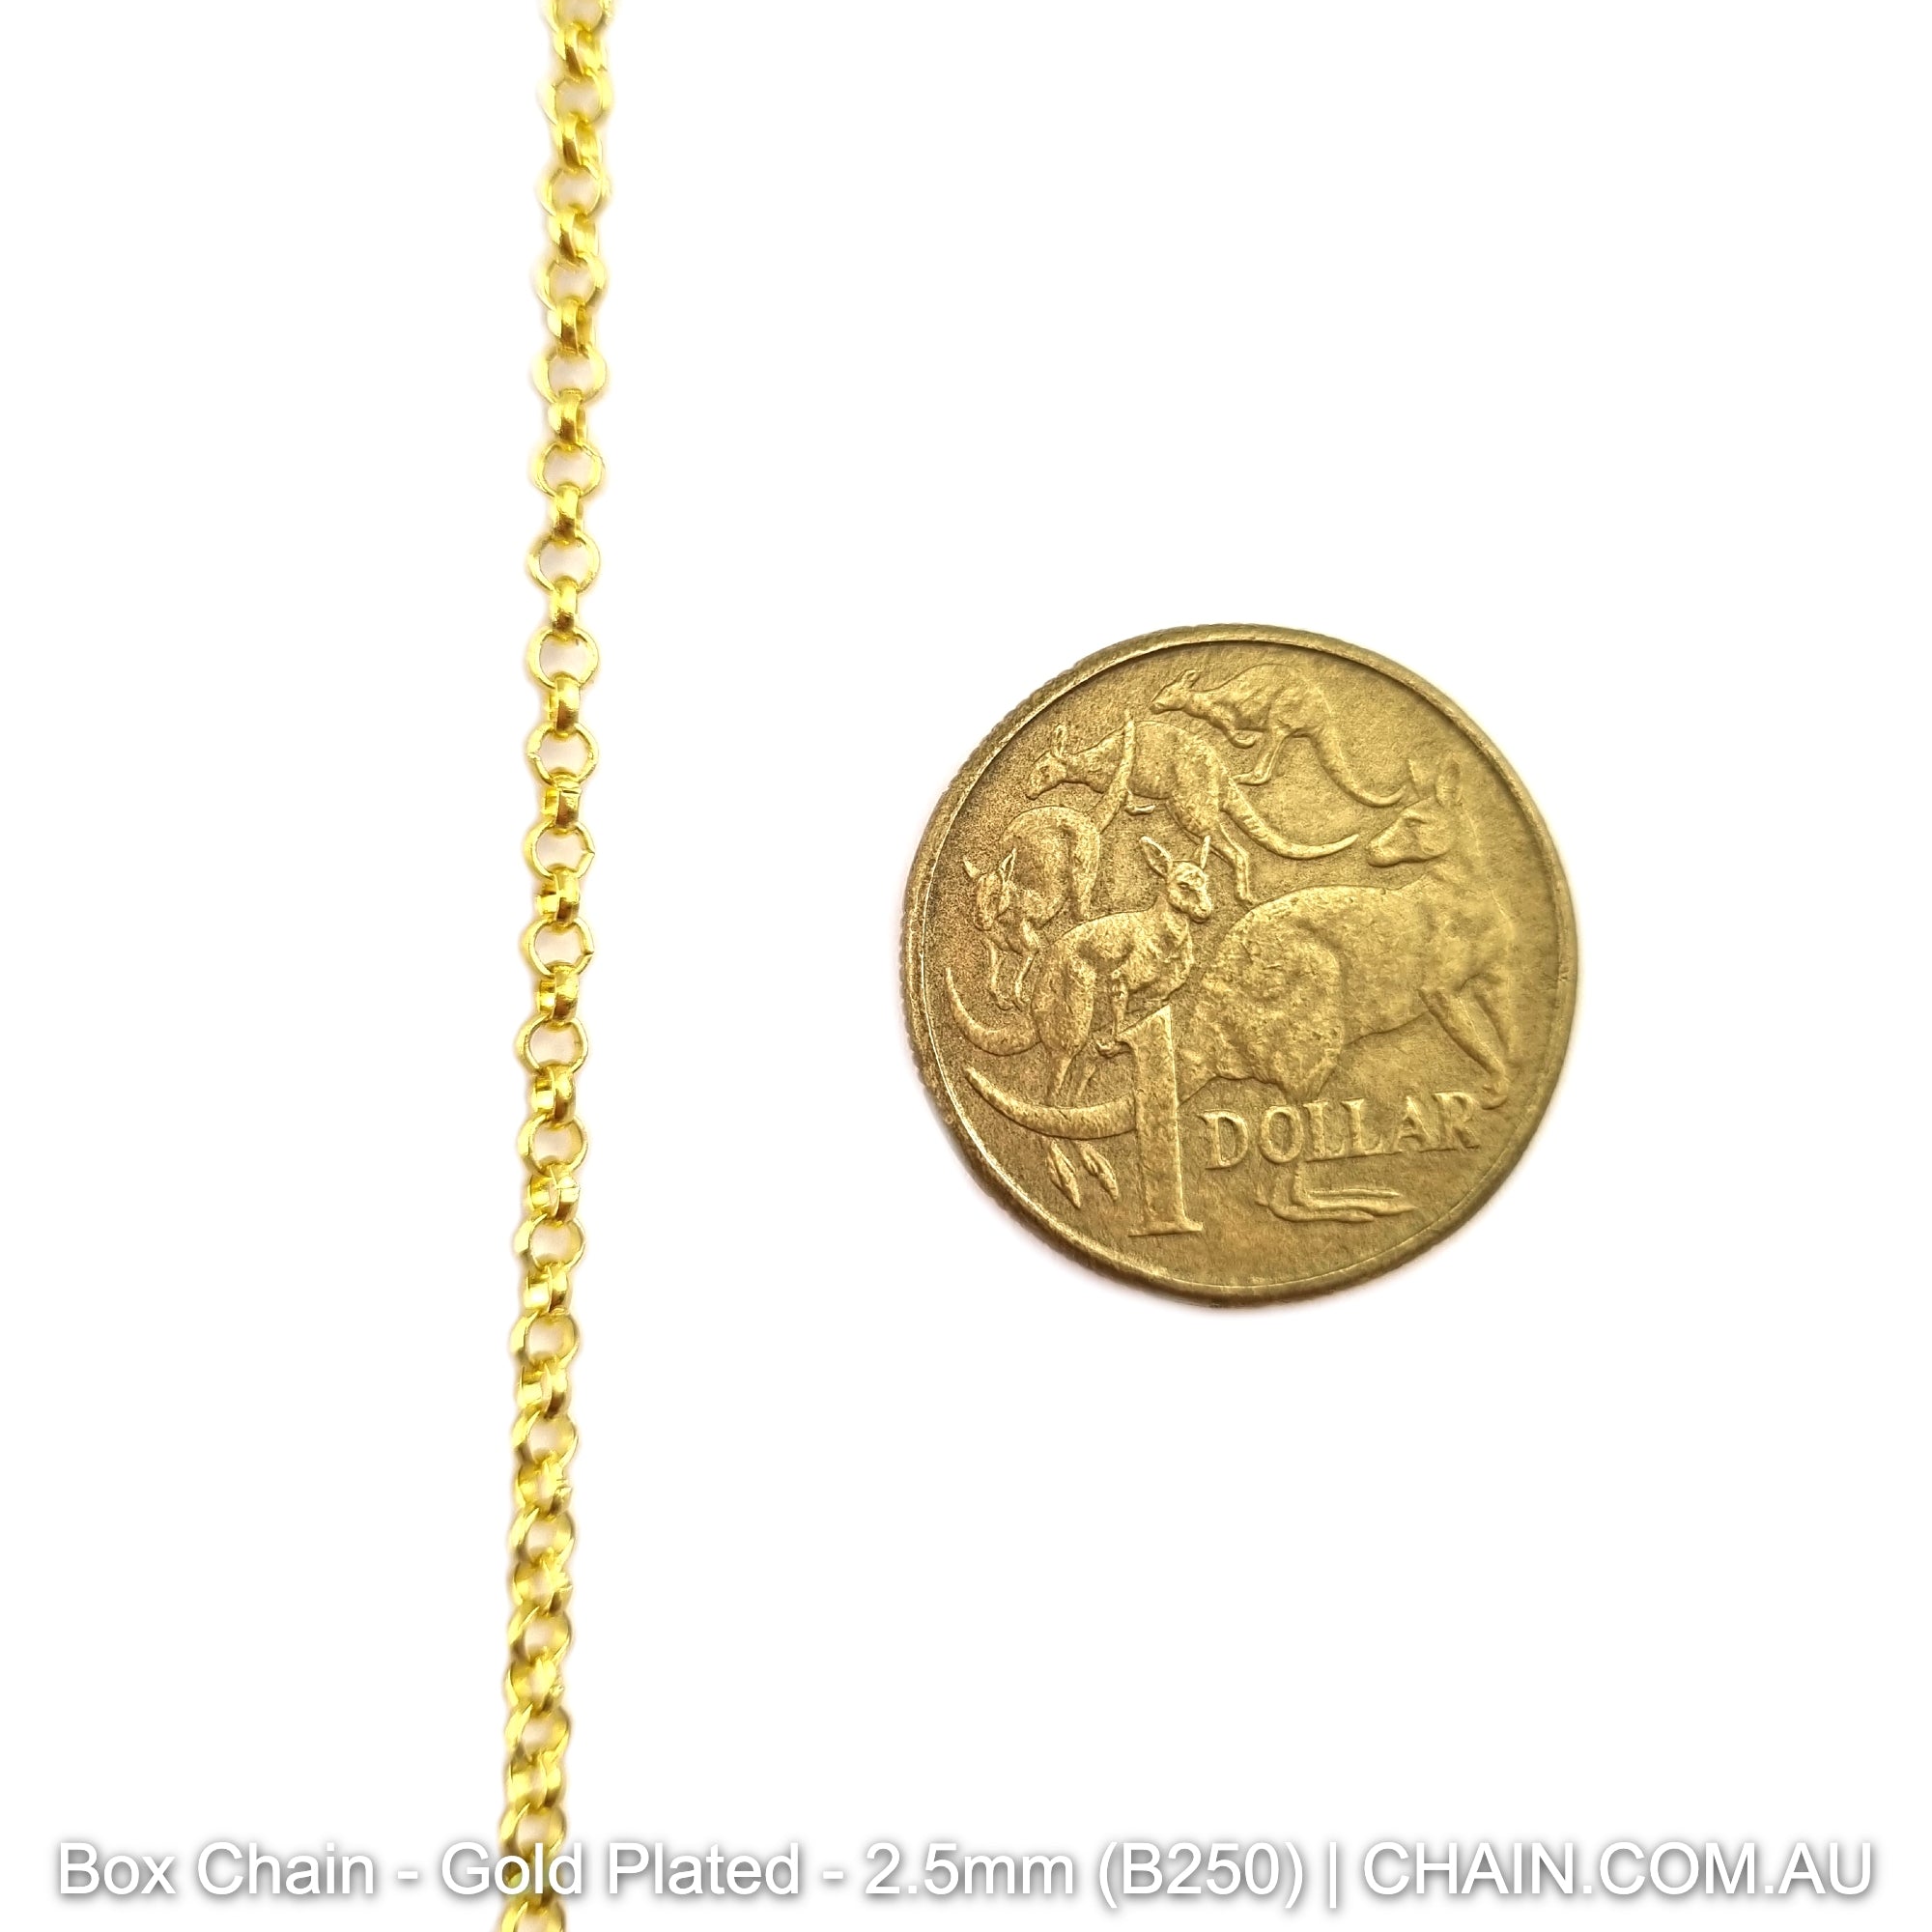 Box Jewellery Chain Gold Plated. Size: 2.5mm x 25m Reel. Shop Jewellery Chain online. Australia wide shipping. Chain.com.au